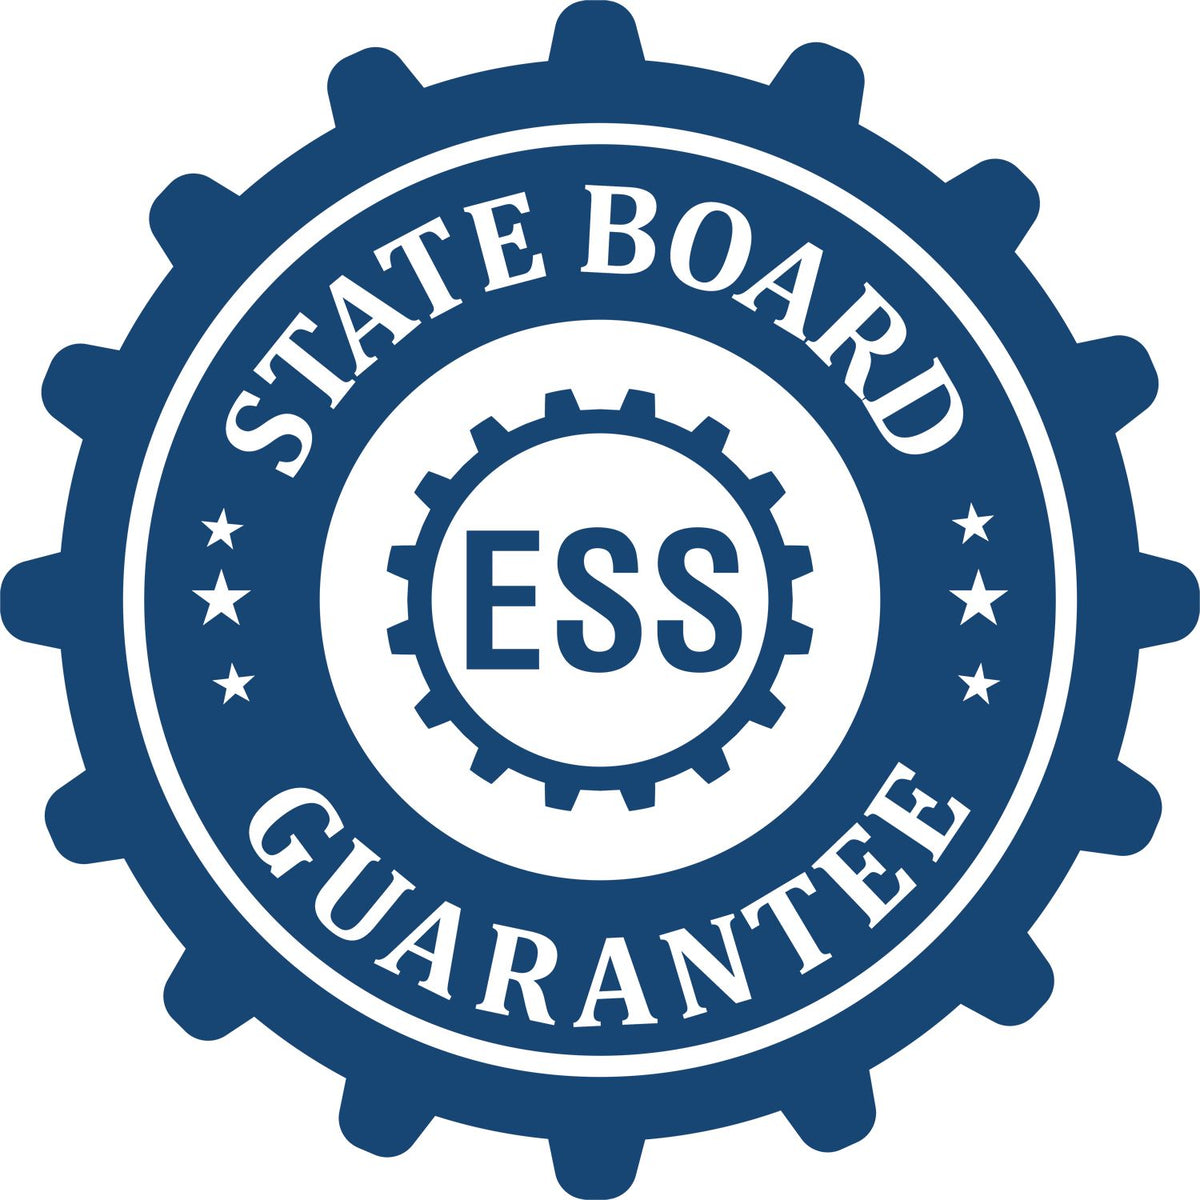 An emblem in a gear shape illustrating a state board guarantee for the Digital New York Landscape Architect Stamp product.